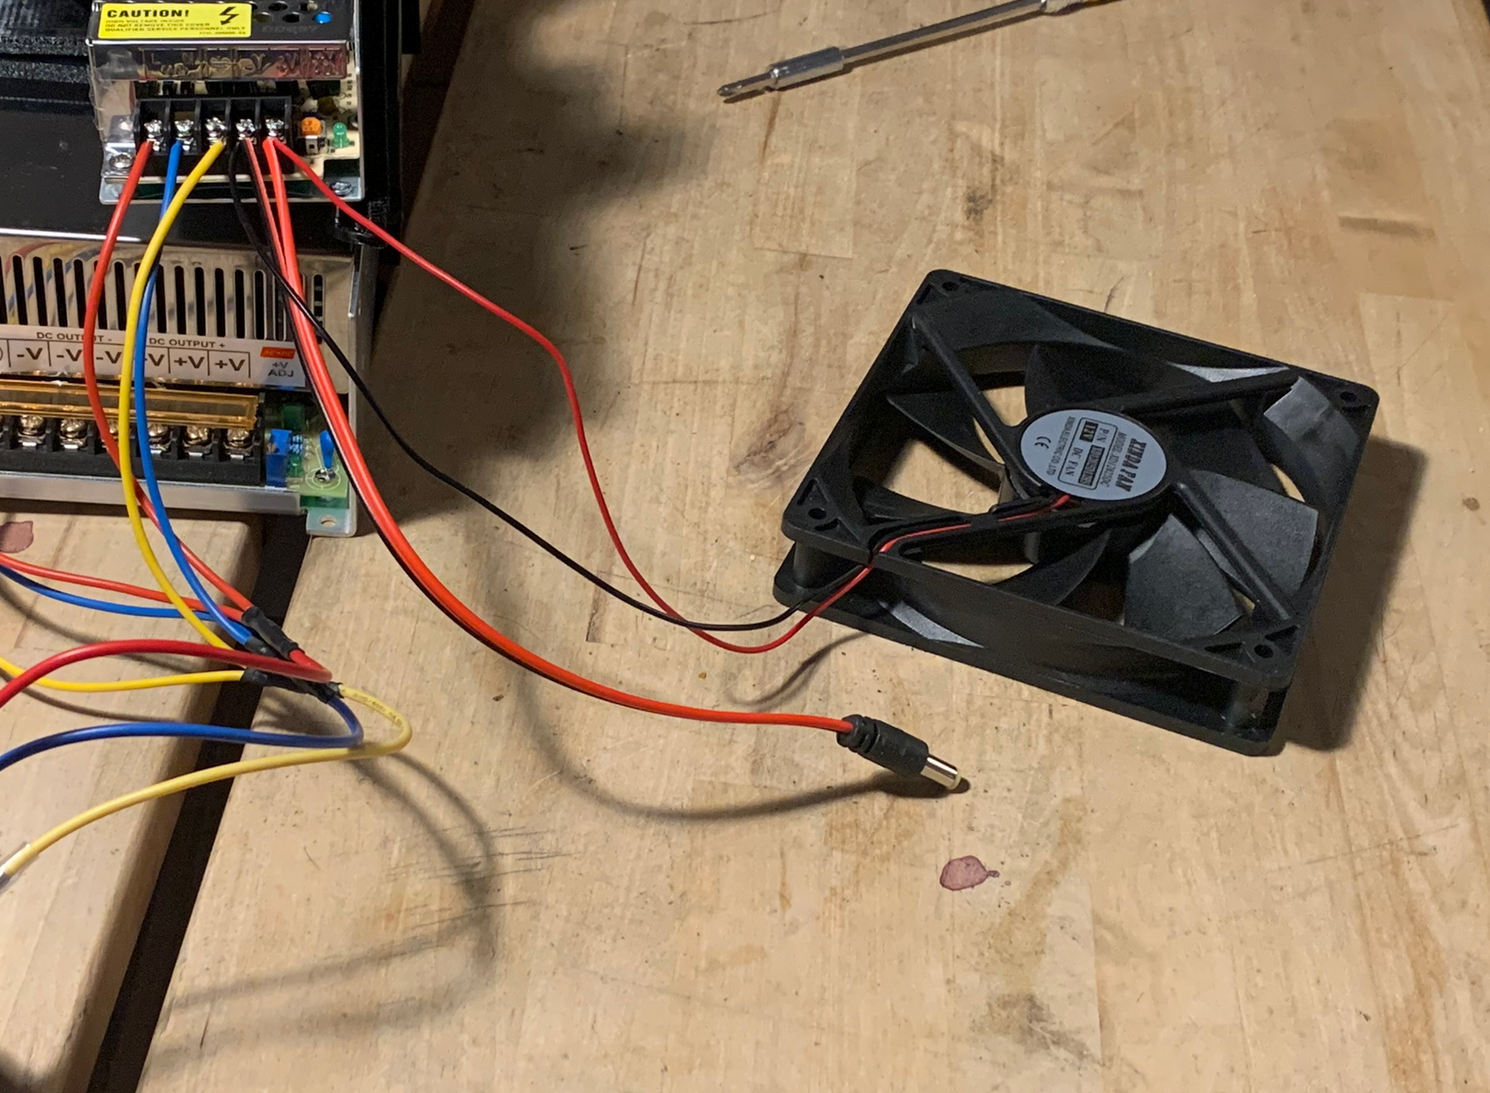 Step 3 - Connecting controller and Fan